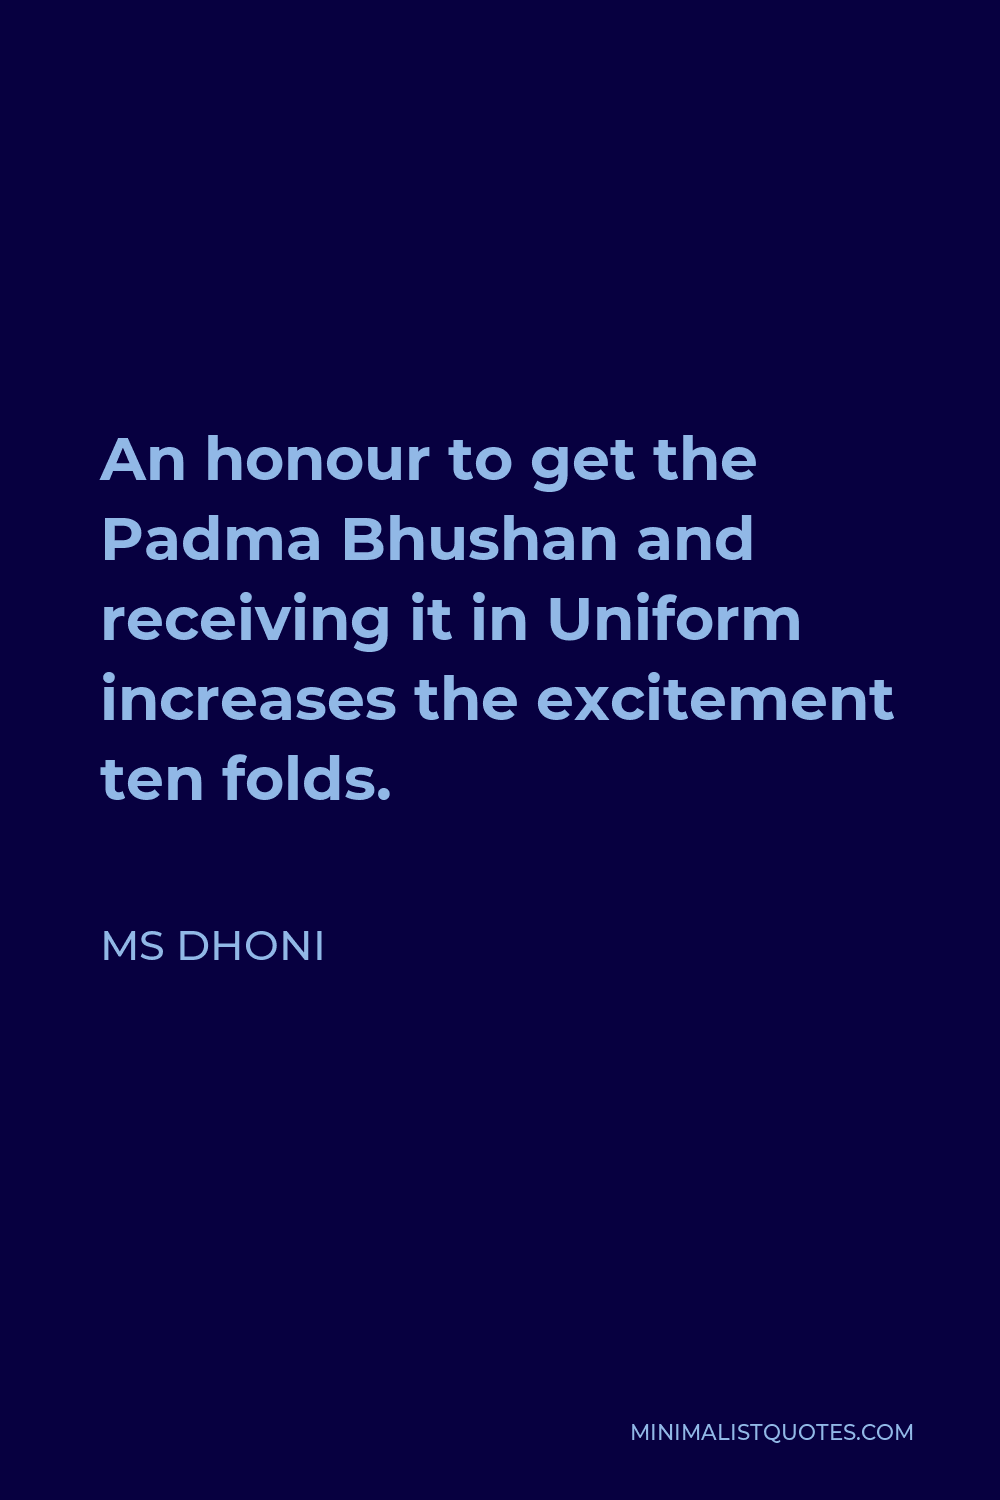 MS Dhoni Quote - An honour to get the Padma Bhushan and receiving it in Uniform increases the excitement ten folds.